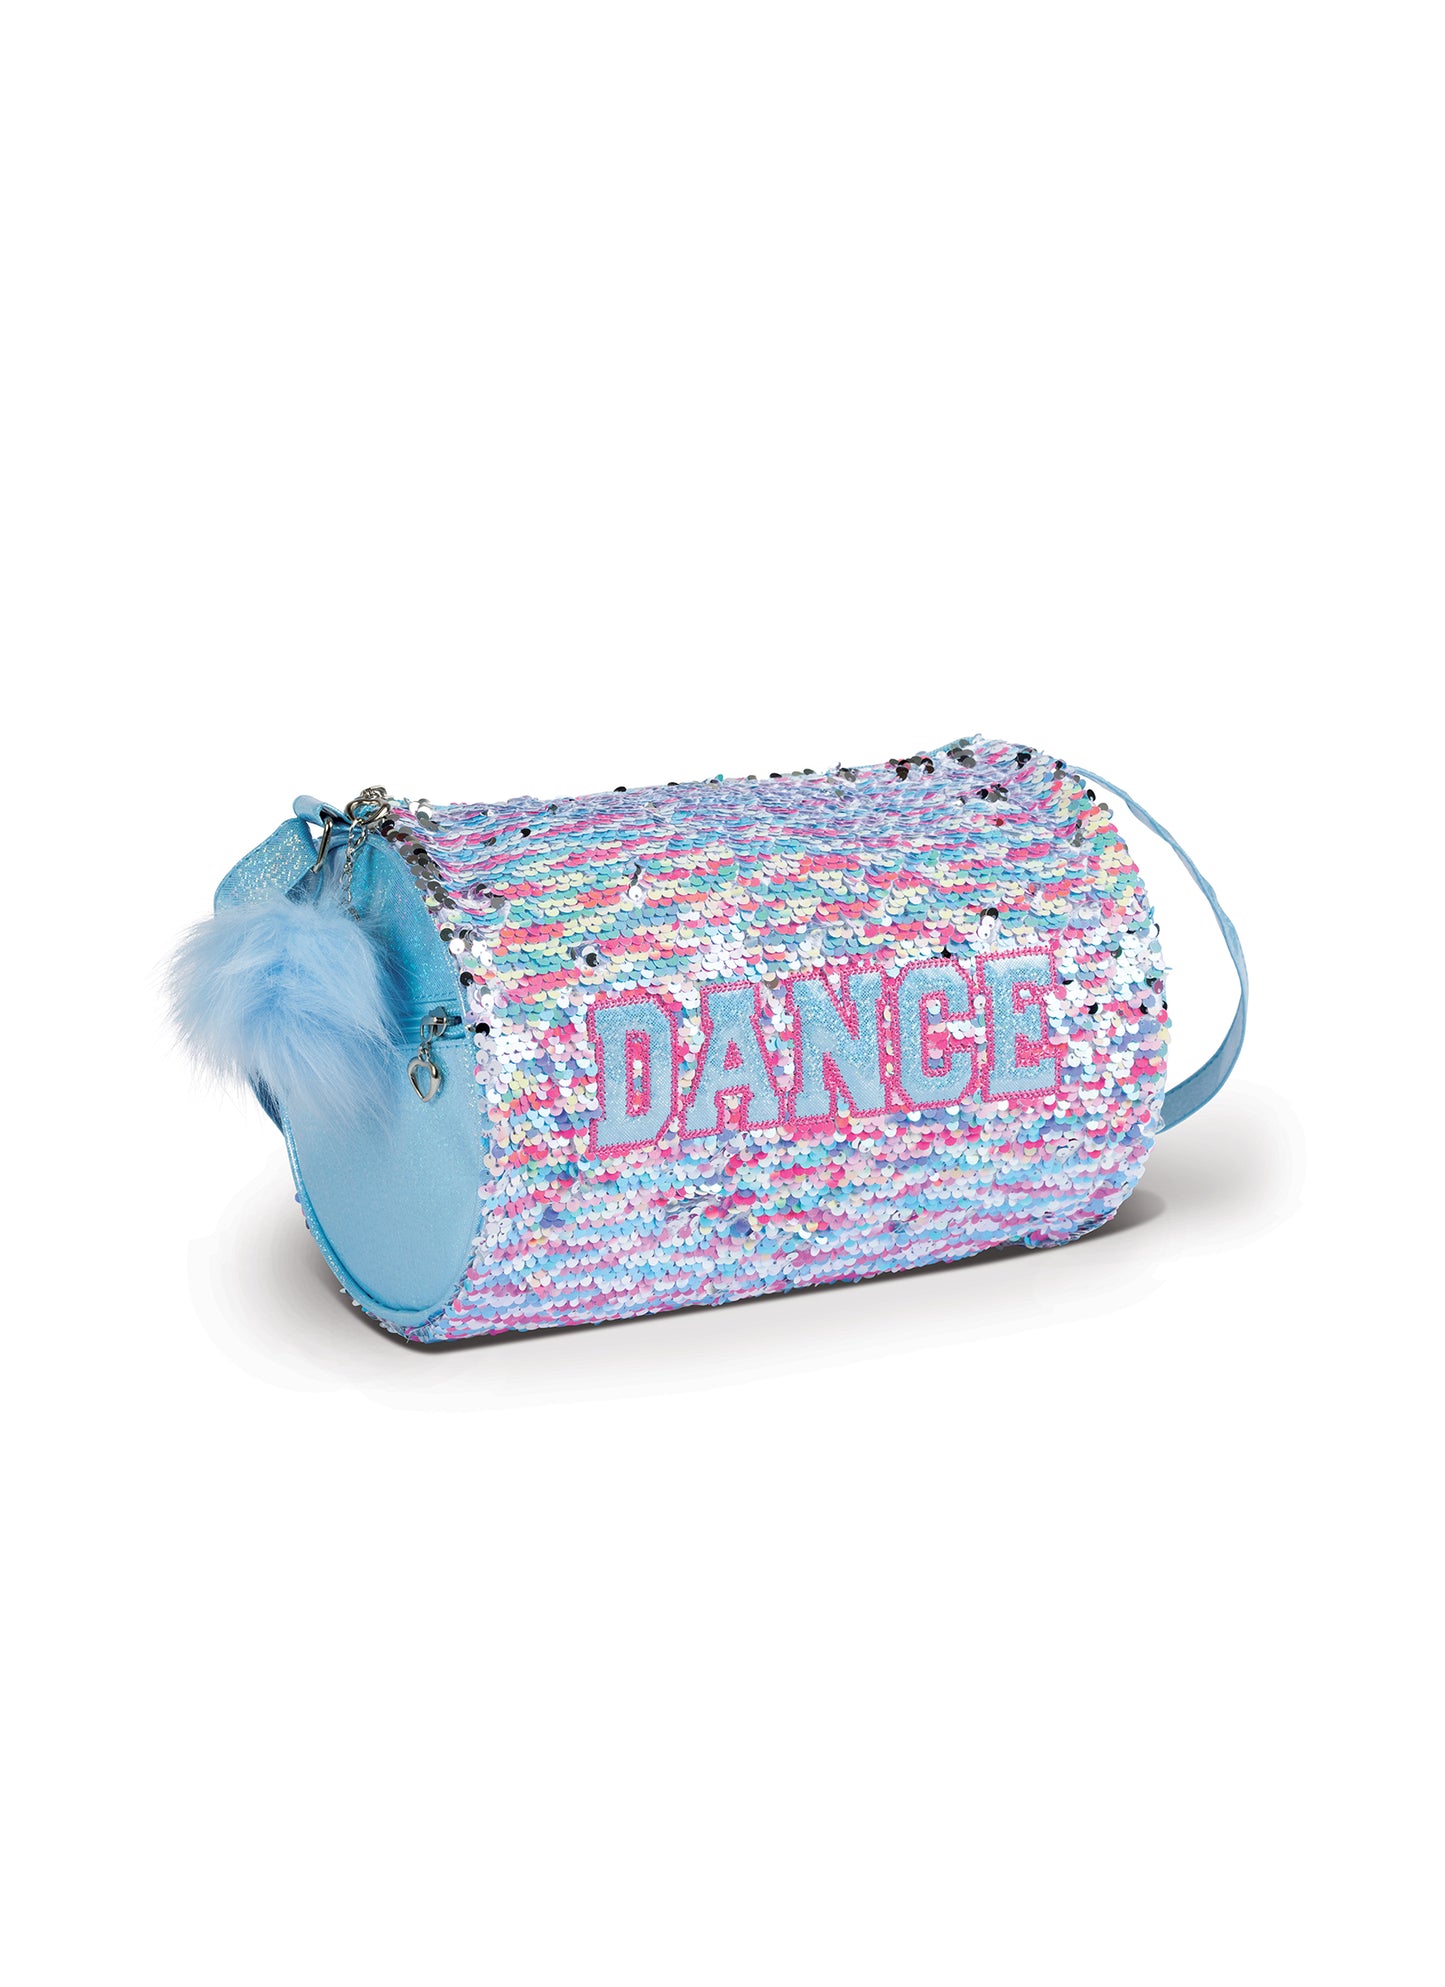 Cotton Candy Roll Duffle Bag